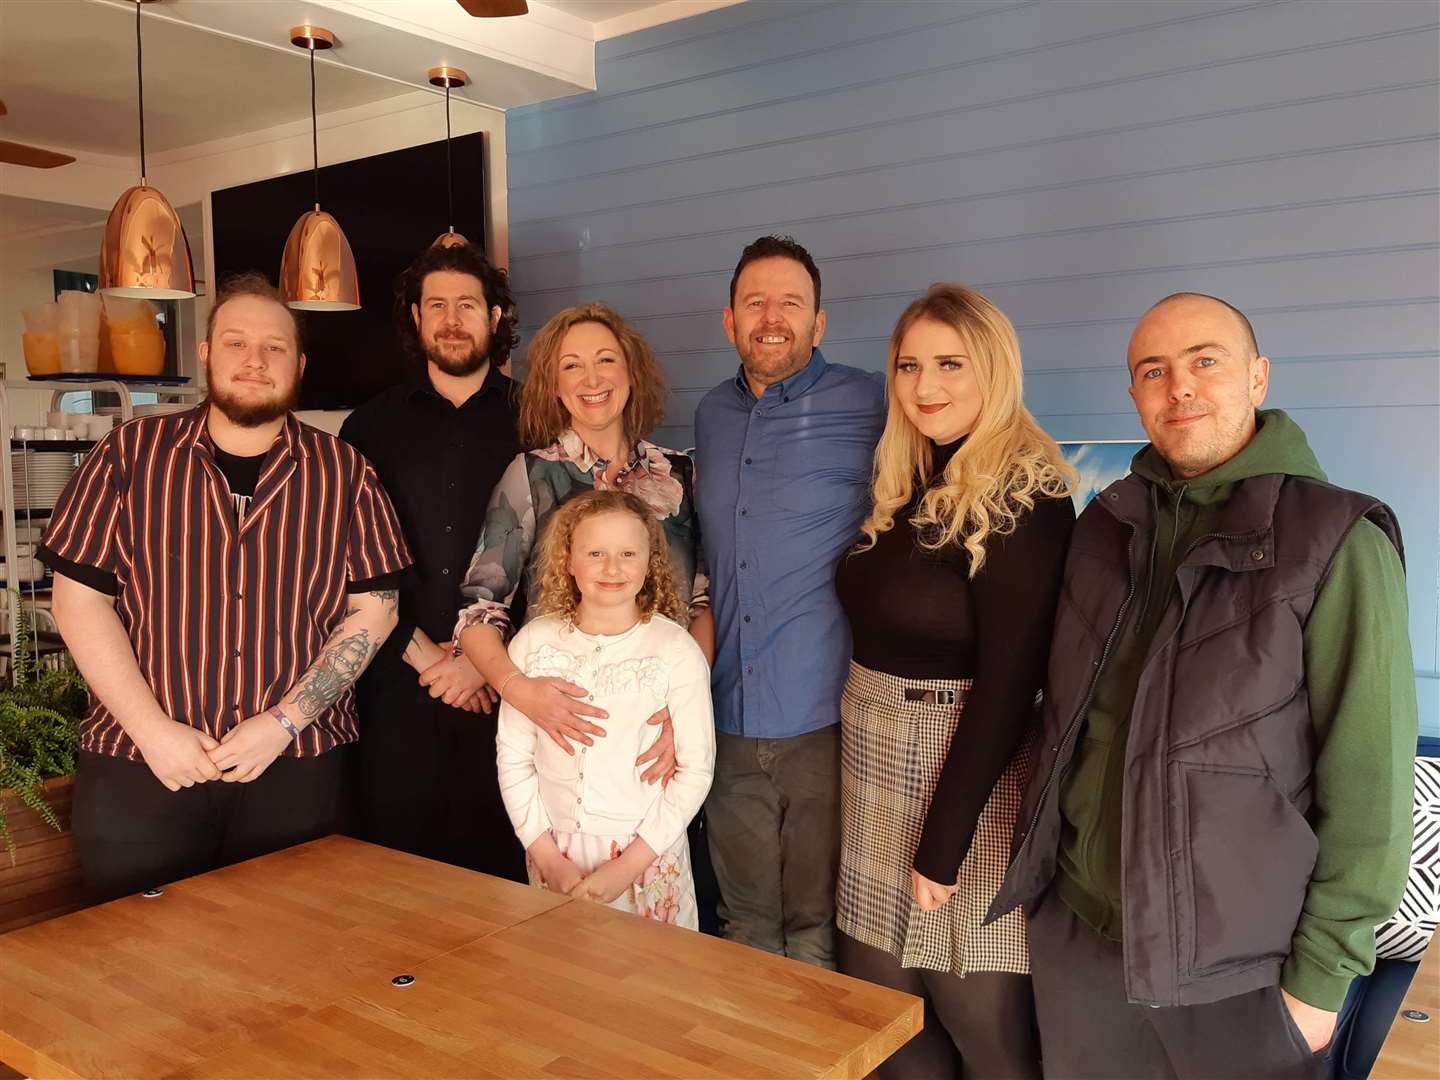 The new Wellingtons team: Andrew Brown, Craig Bush, managers Sharon and Pete Cullen, eight-year-old Carolanne Cullen, Aimee Wilkinson, and John Jones.